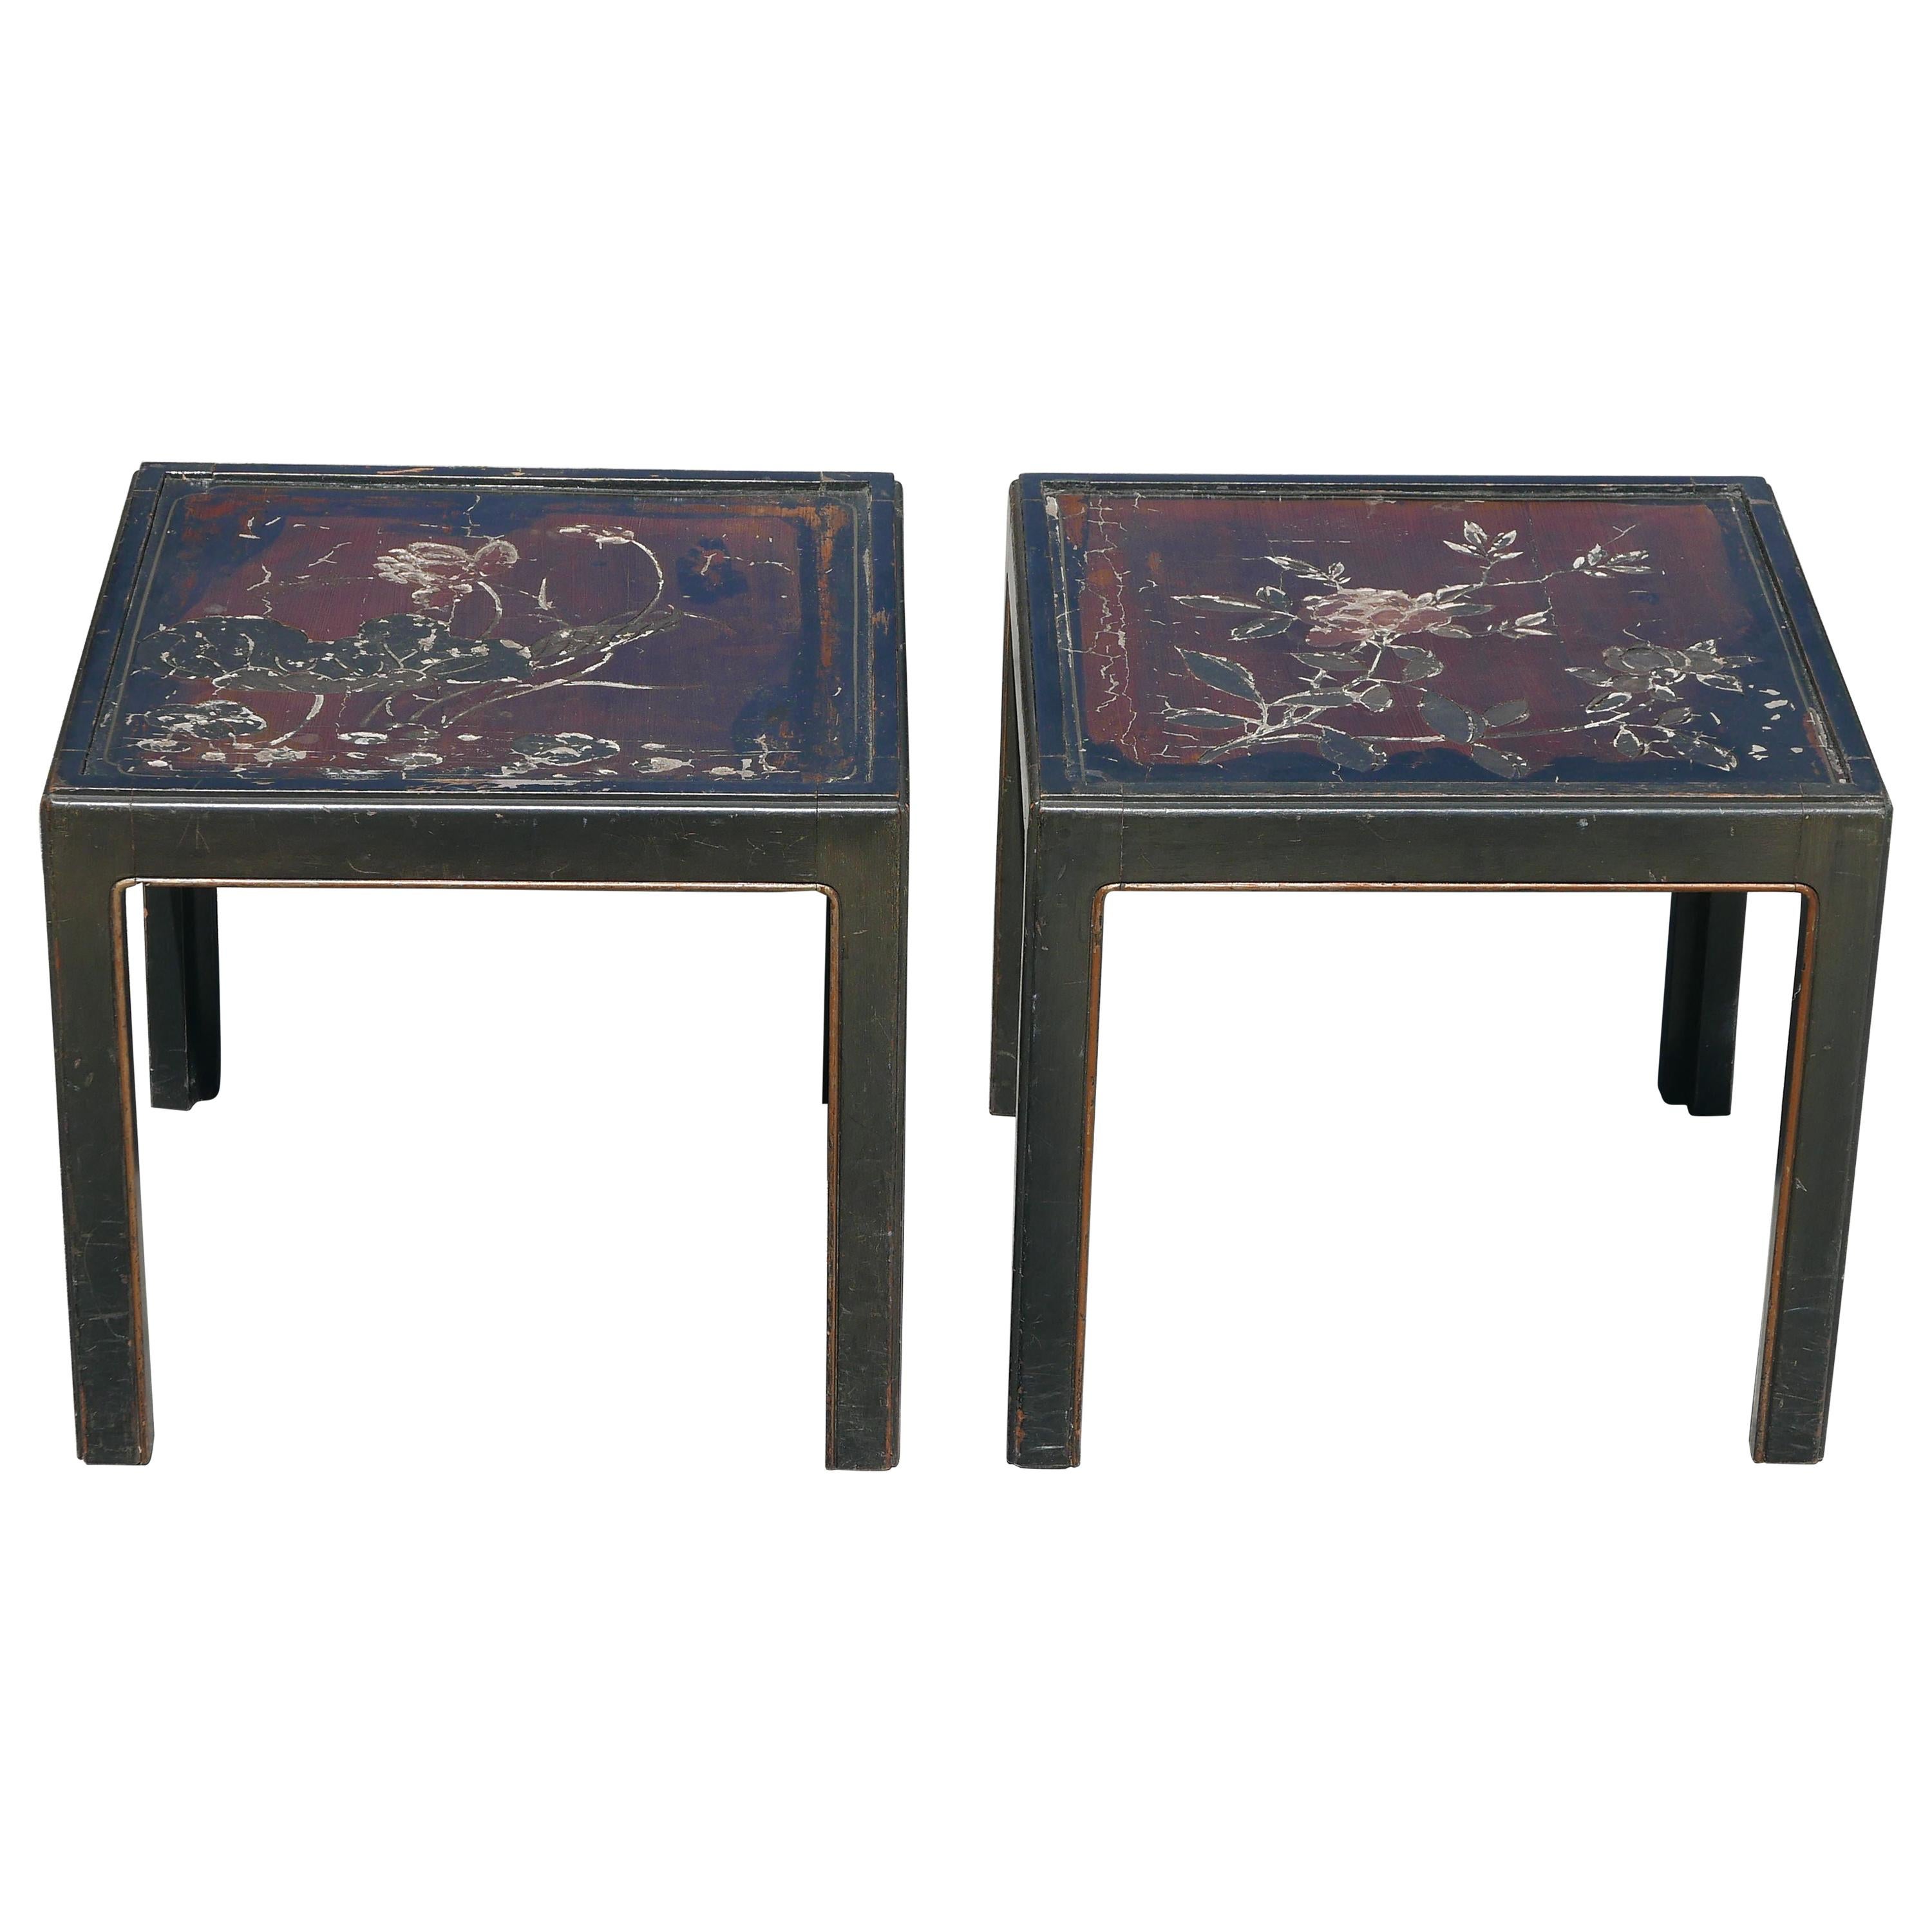 Pair of Vintage Parsons Tables inset with 18th Century Chinese Panels